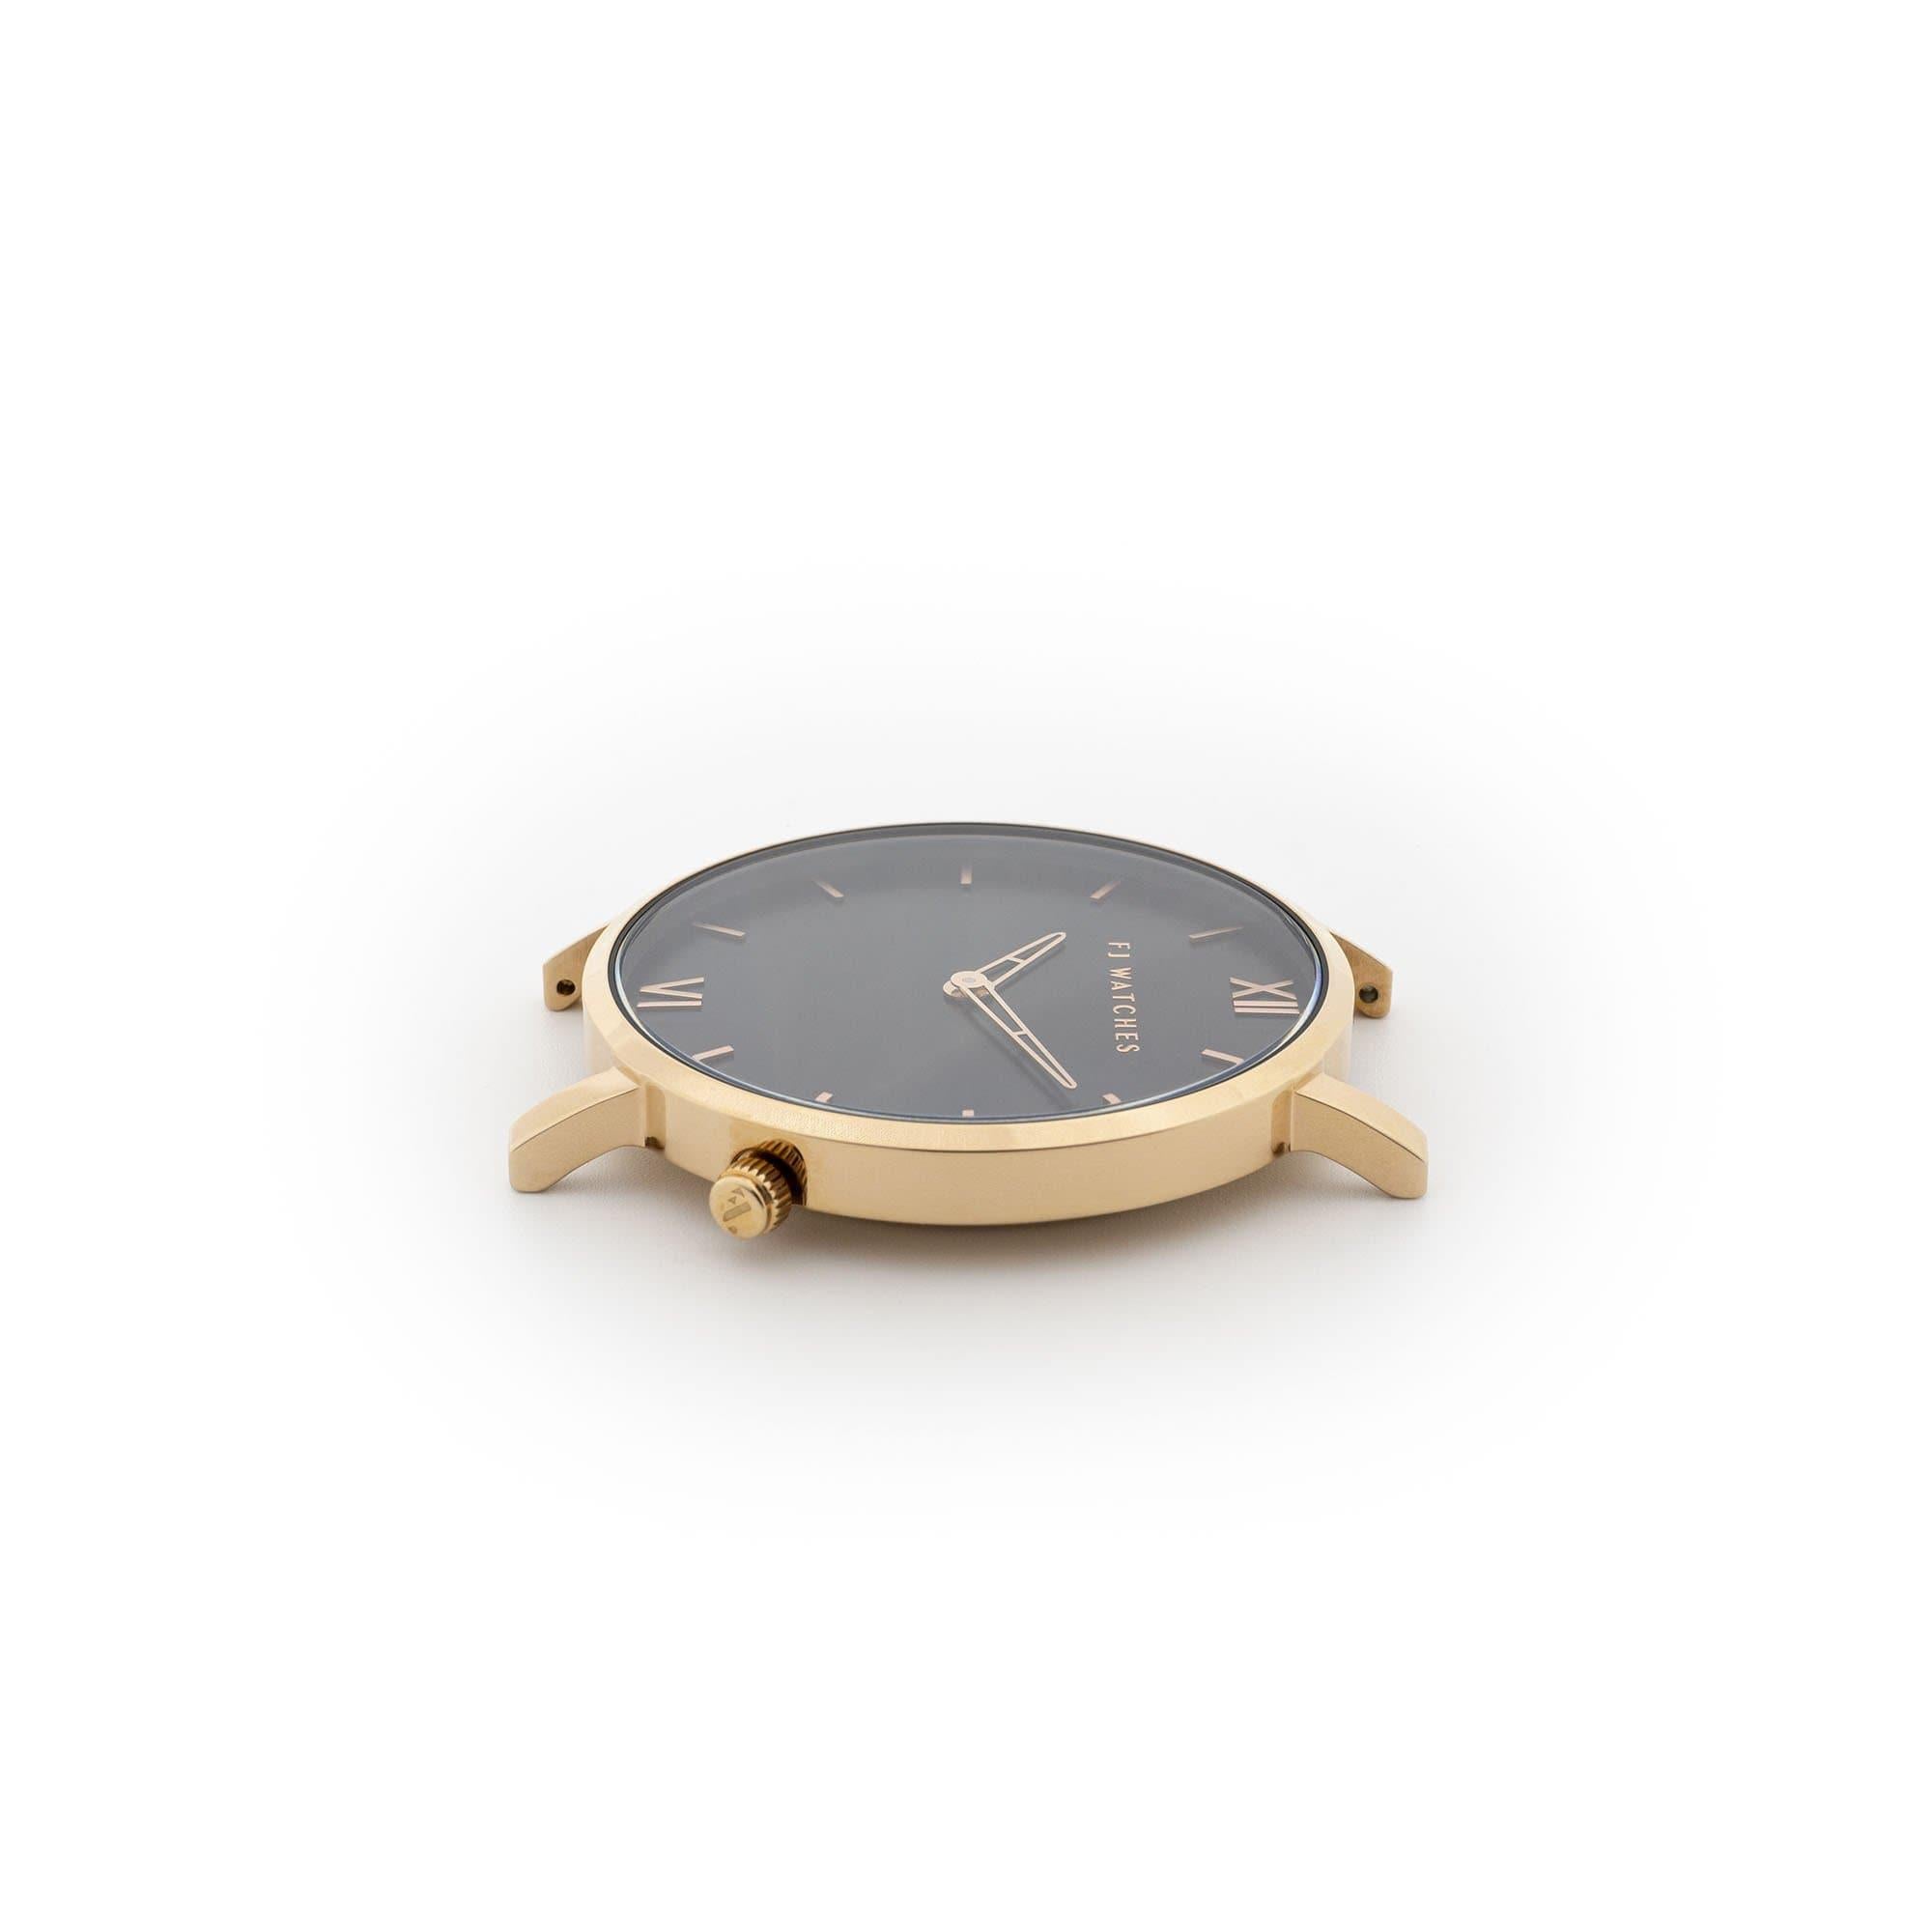 Discover Golden moon, a 36 mm women's watch from Five Jwlry with a black and rose gold dial. This one can be paired with a rose gold or black mesh bracelet!